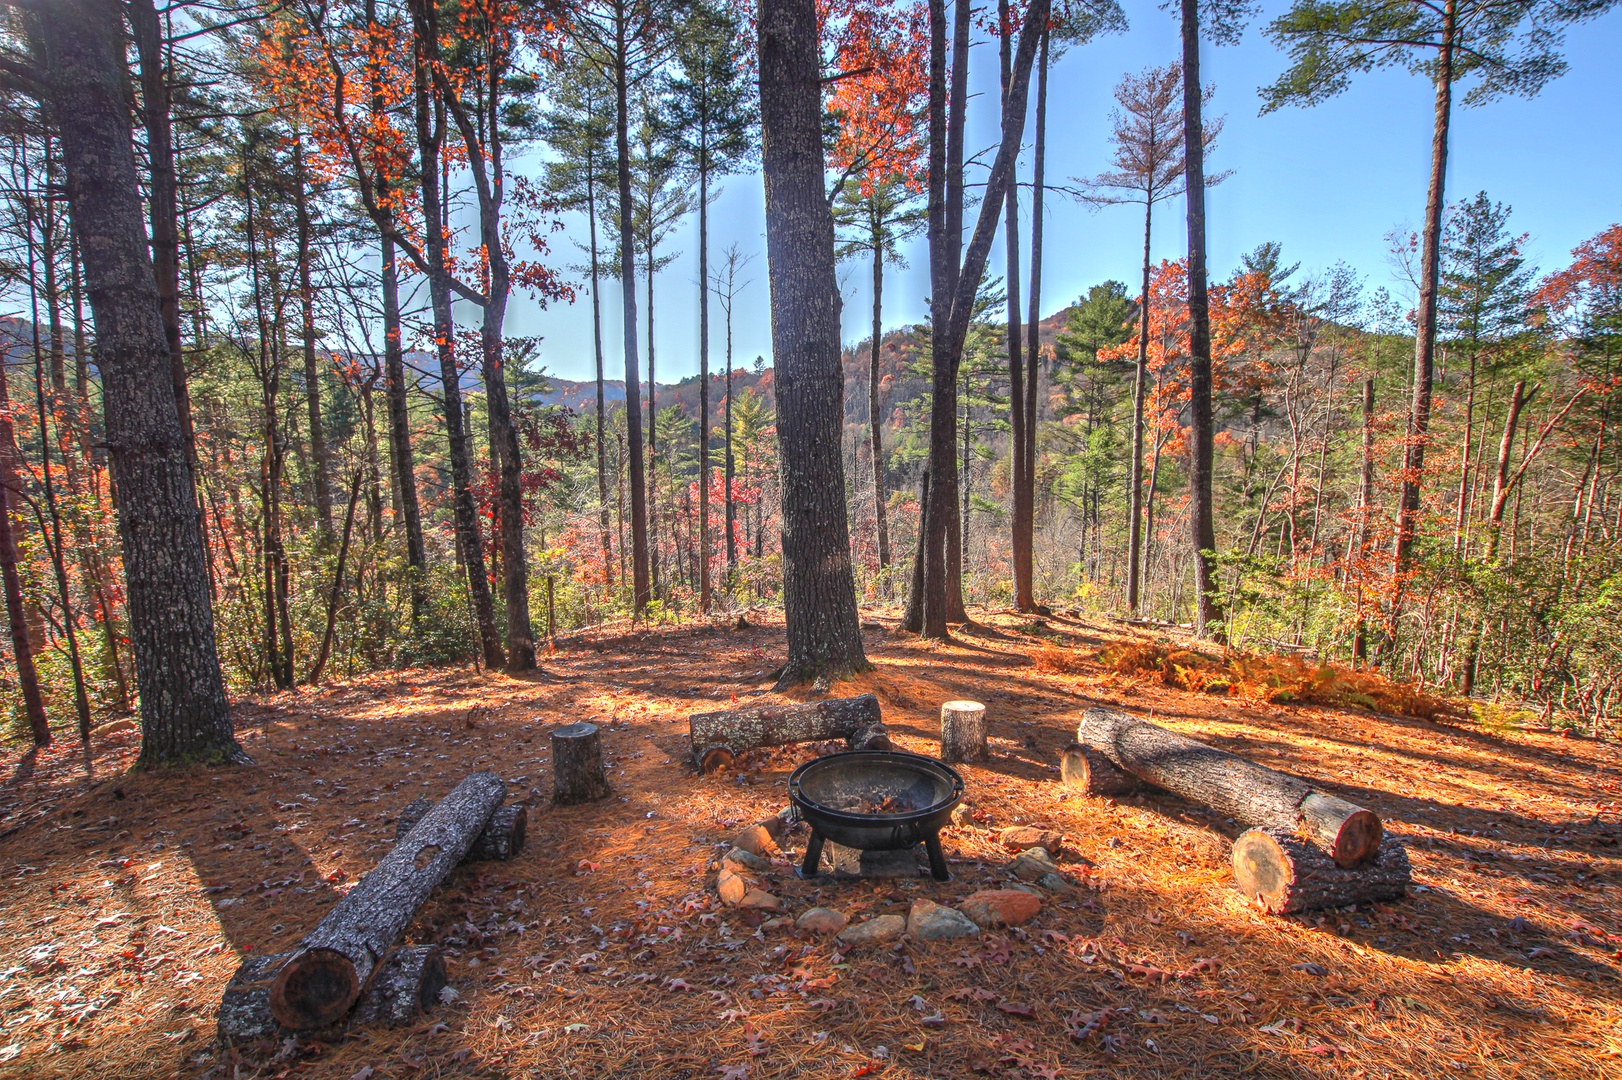 Laurel Breeze - Fire Pit Nestled in the Woods